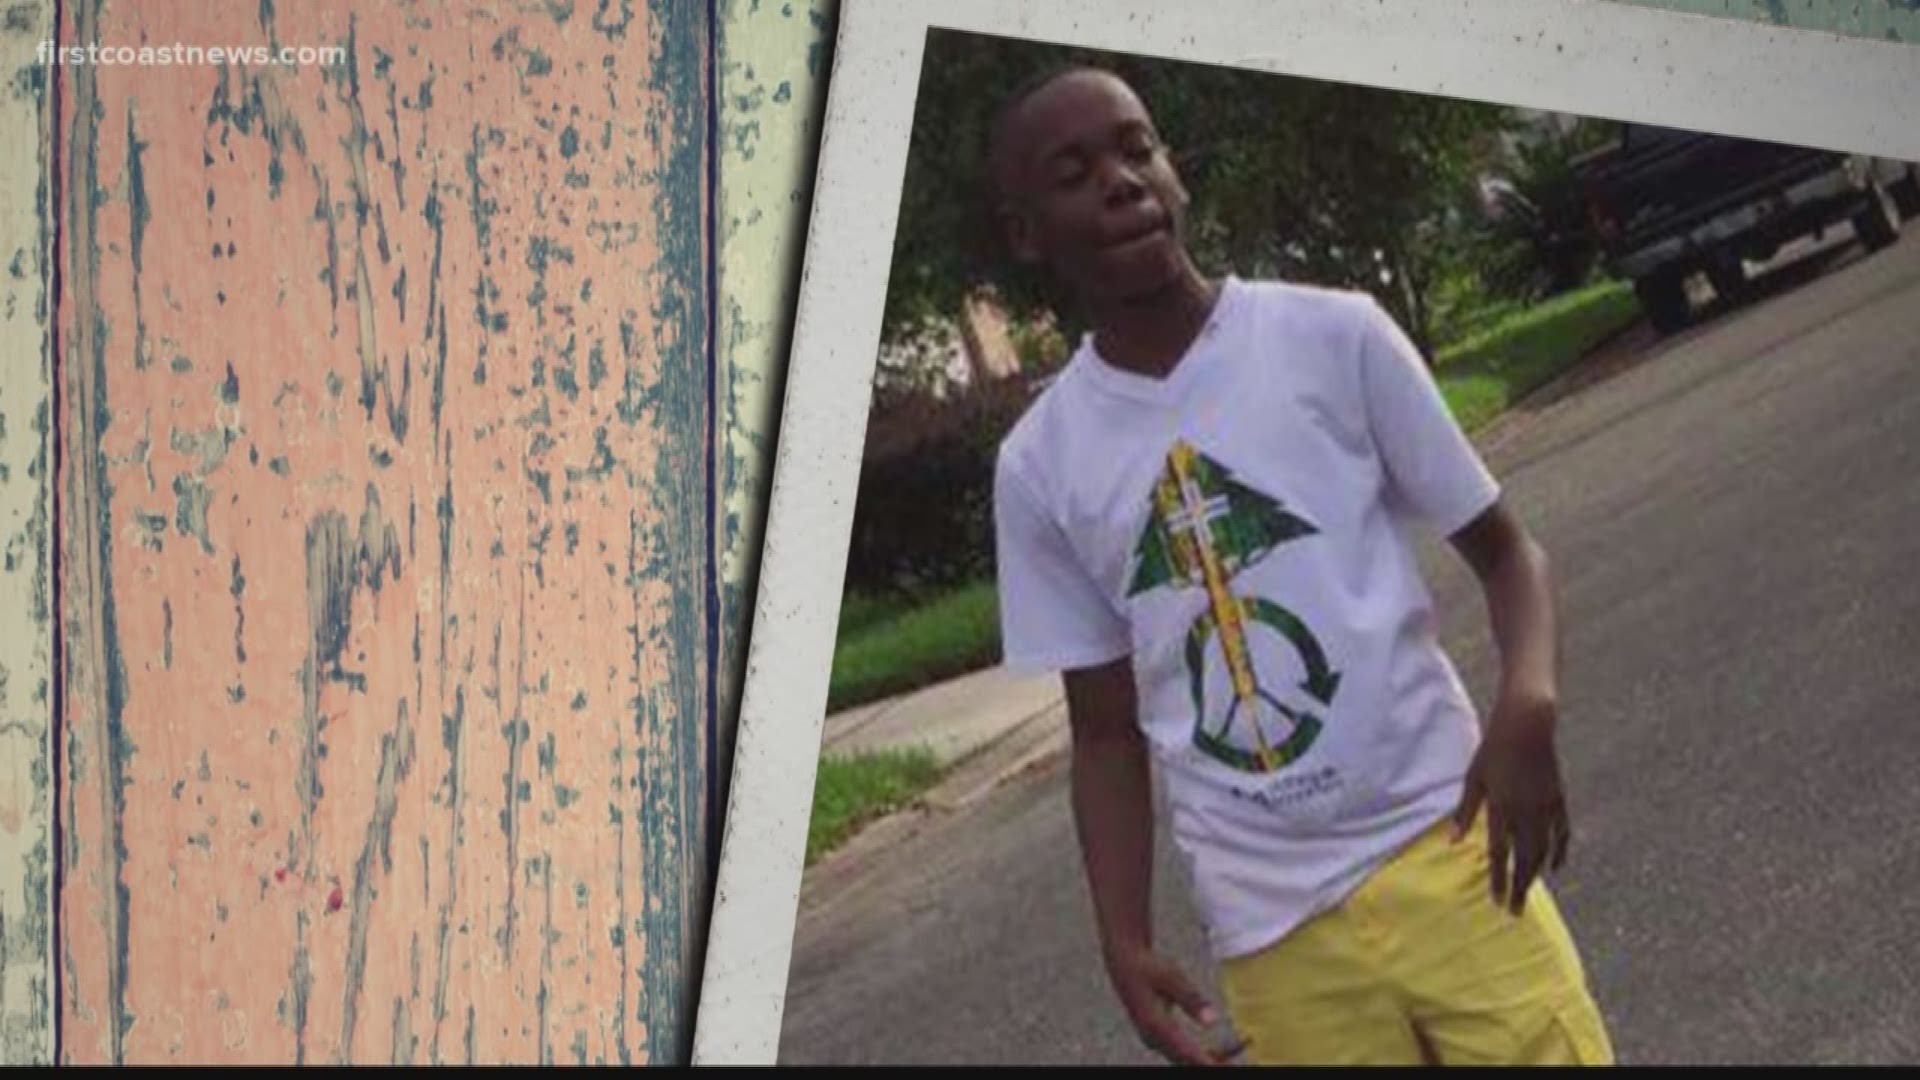 When will the violence end? The grieving parents of 14-year-old Denim Williams who was killed in a Jacksonville city park say enough is enough.